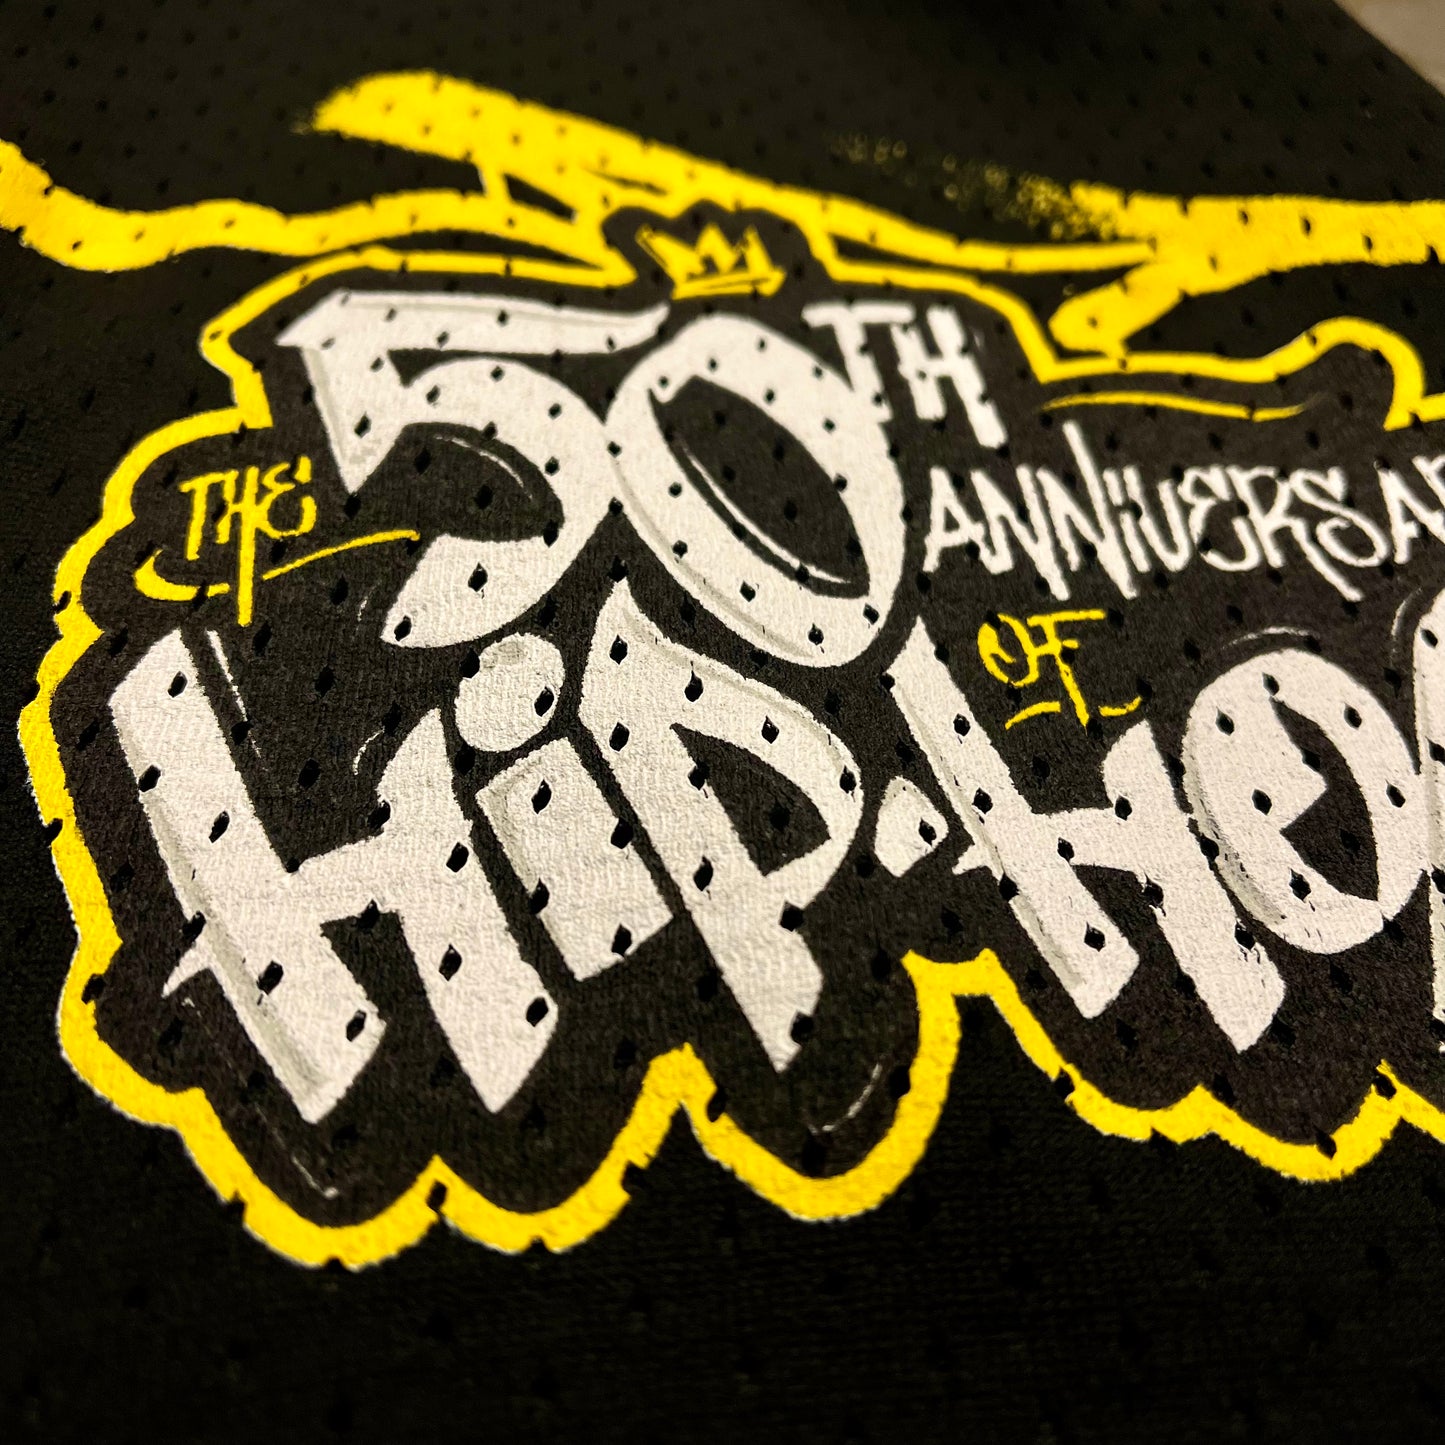 MITCHELL AND NESS - 50TH ANNIVERSARY OF HIP HOP LEGENDS SHORTS